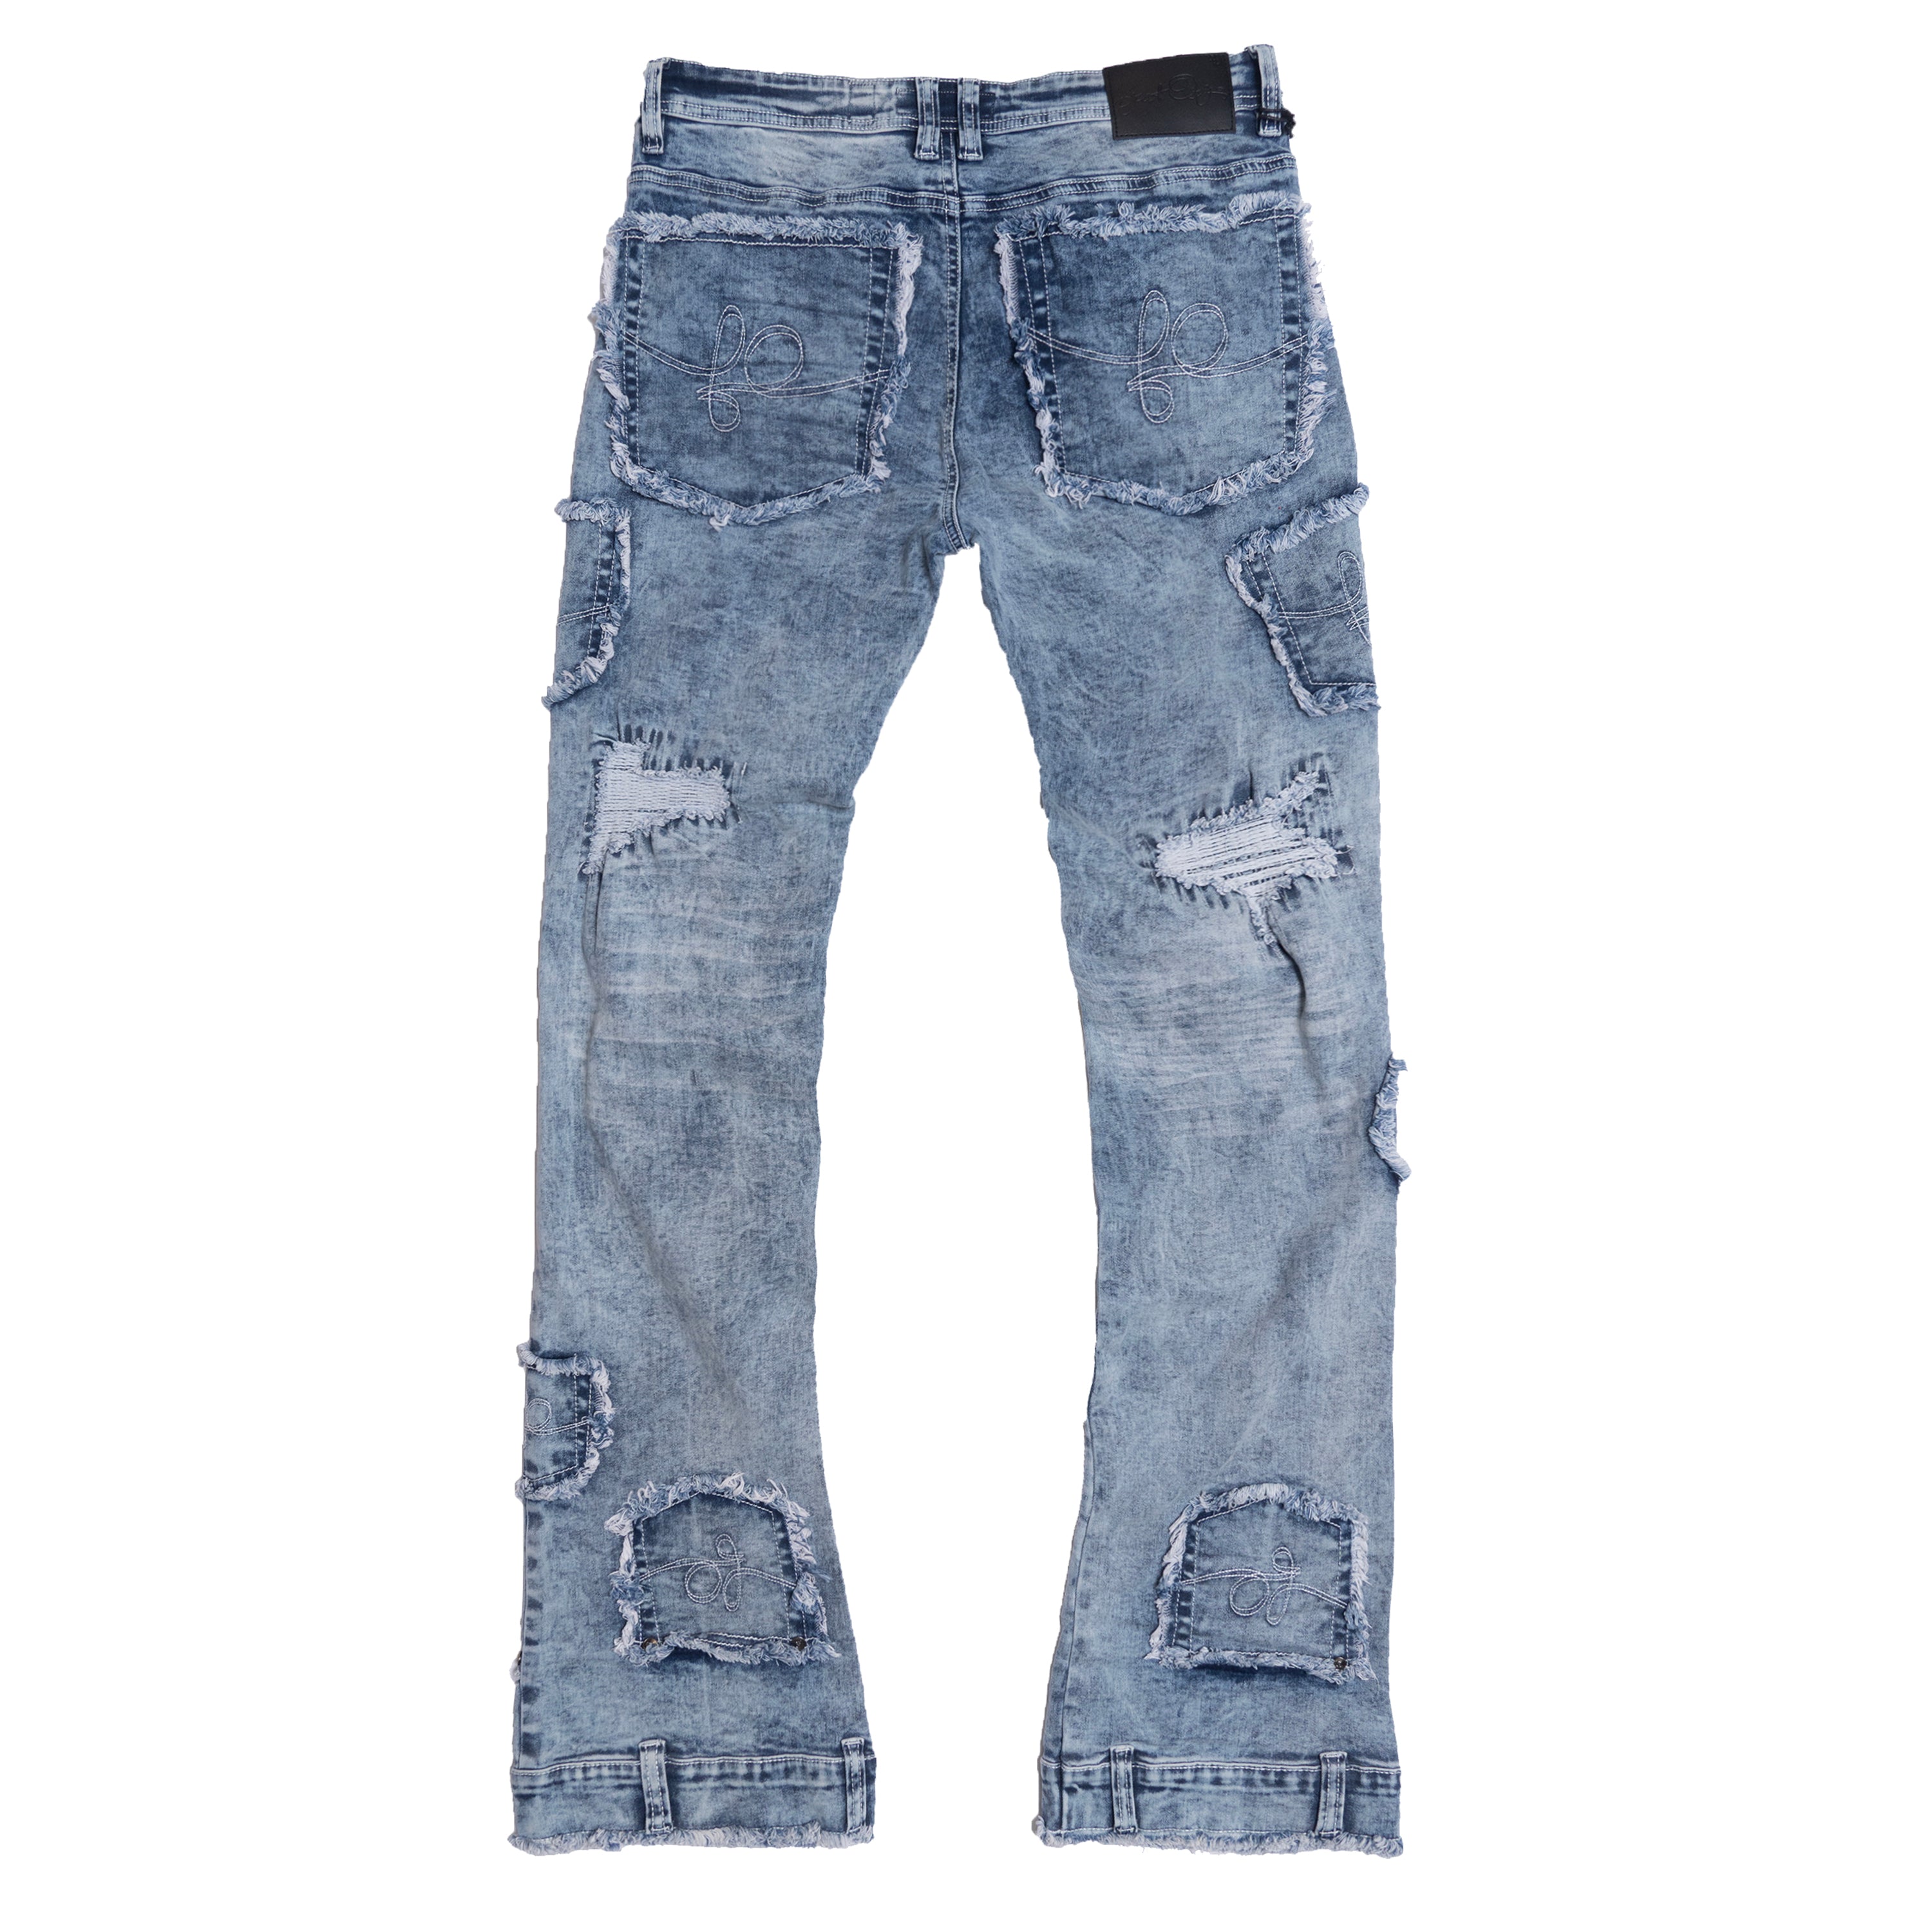 F1721 Rackade Stacked Jeans - Light Wash